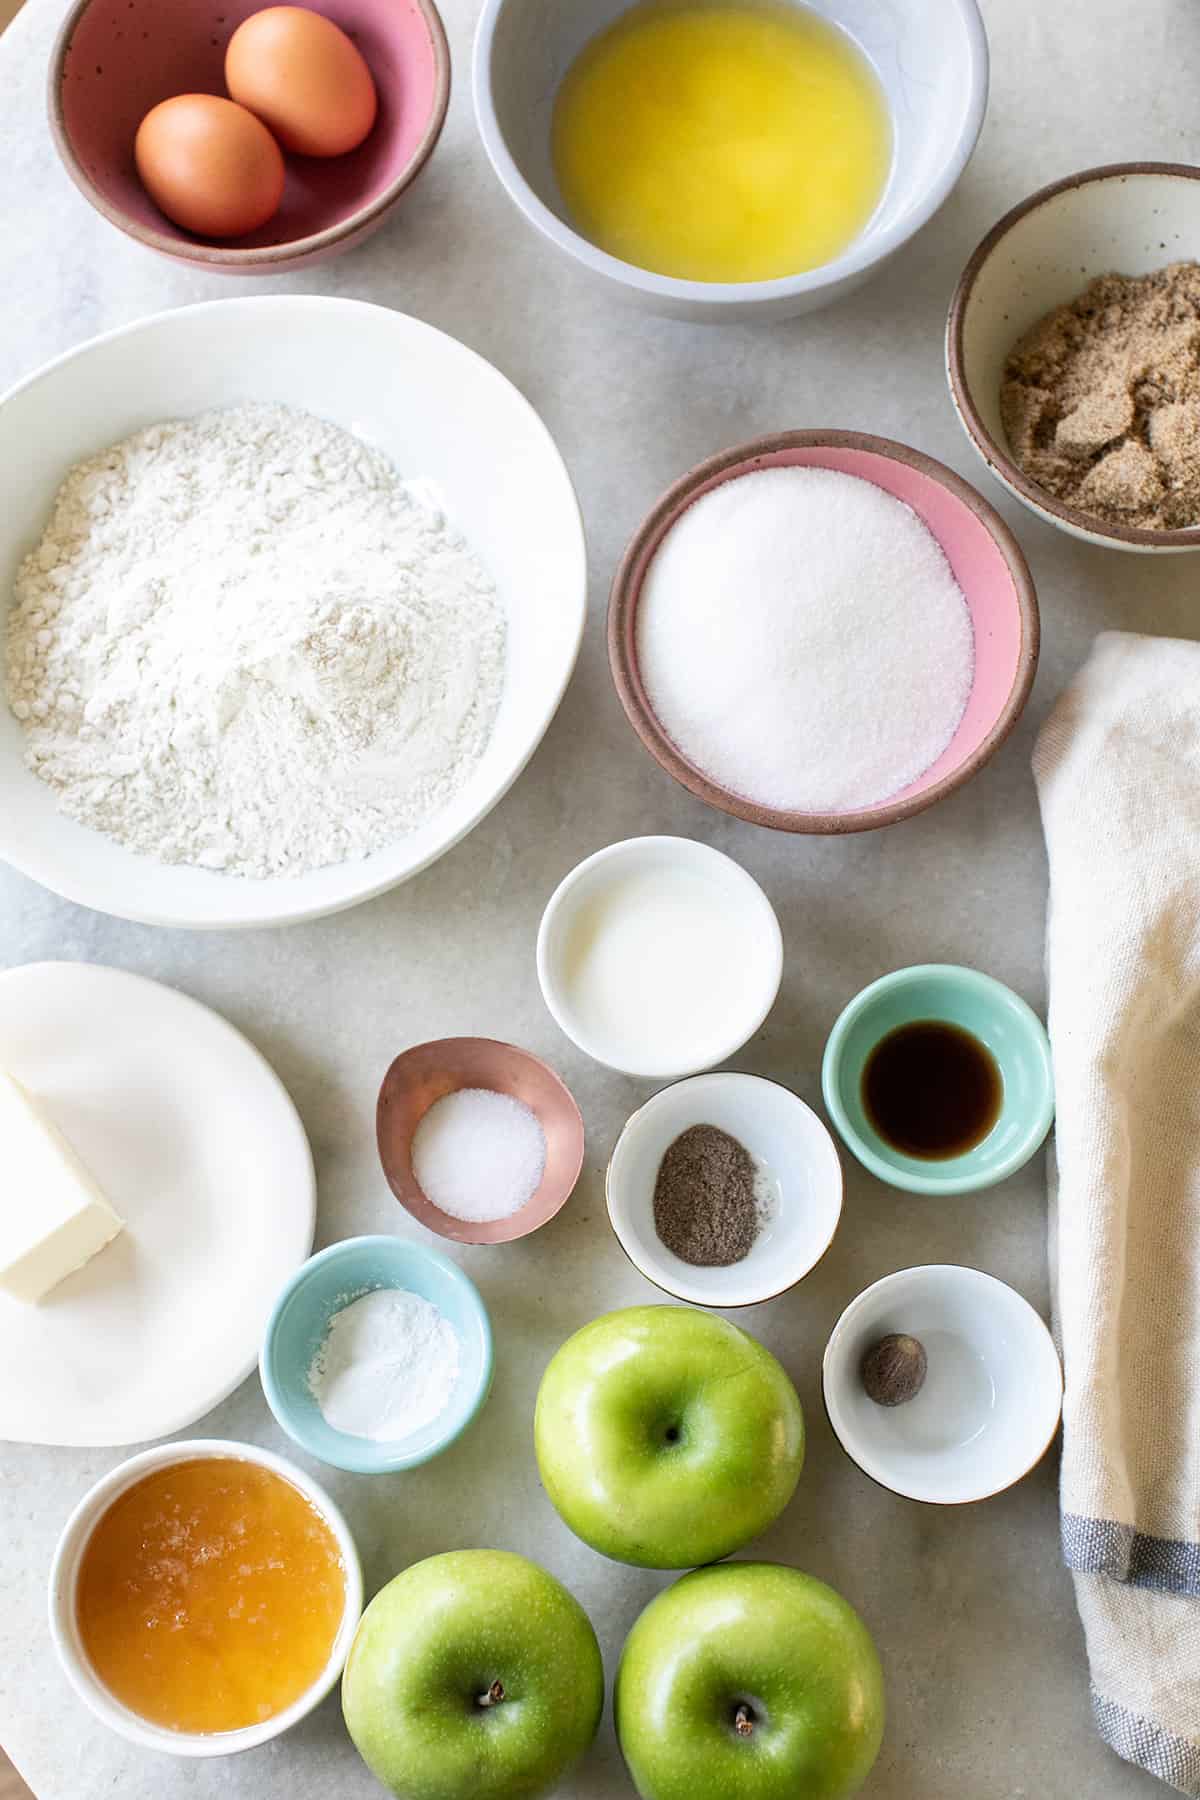 Ingredients in bowls to make an apple cake.